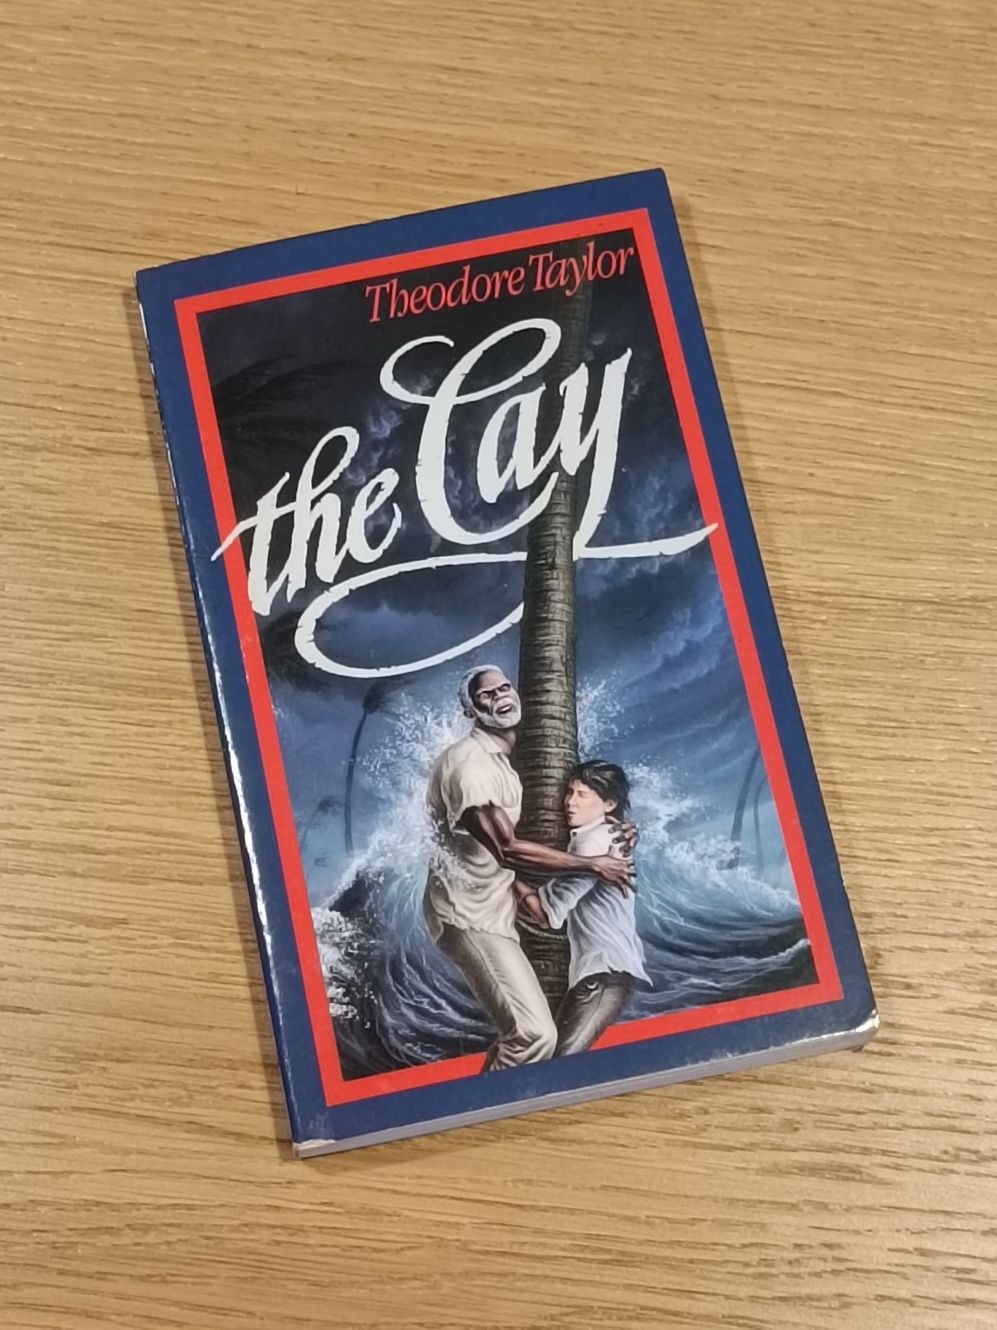 Livro "The Cay" by Theodore Taylor